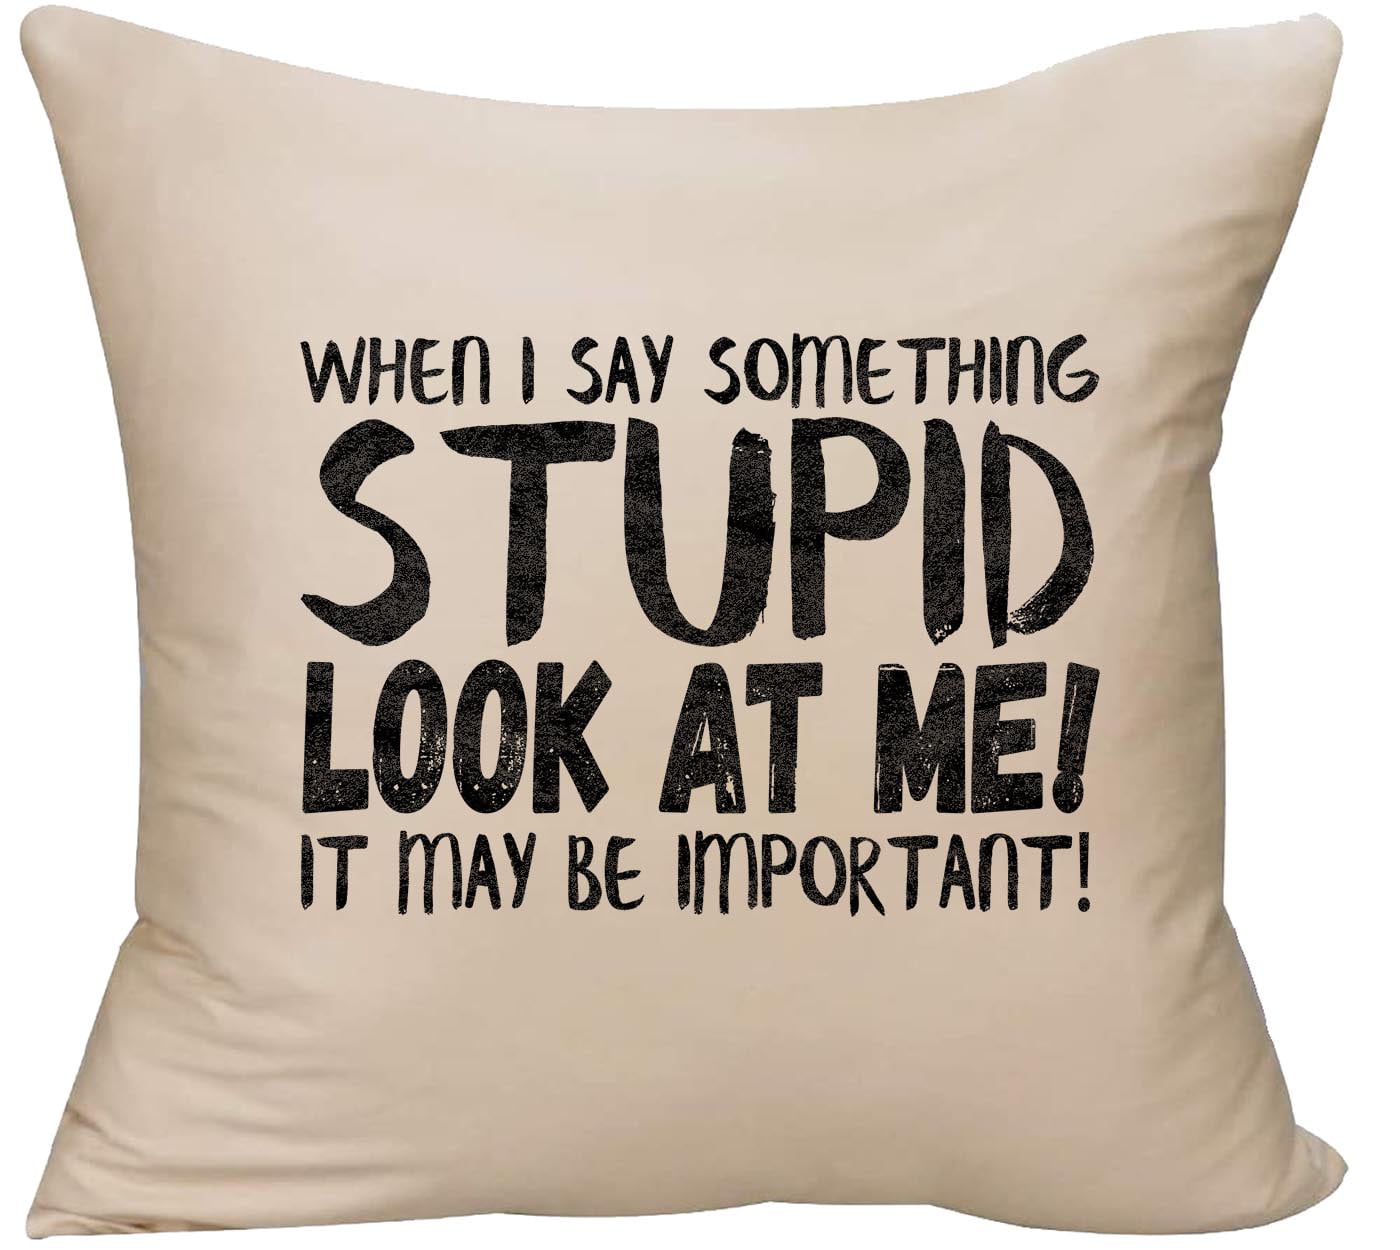 Multicolor Wine misses me hilarious graphic design I Like to Think Wine Misses me Too Funny Graphic Design Throw Pillow 18x18 